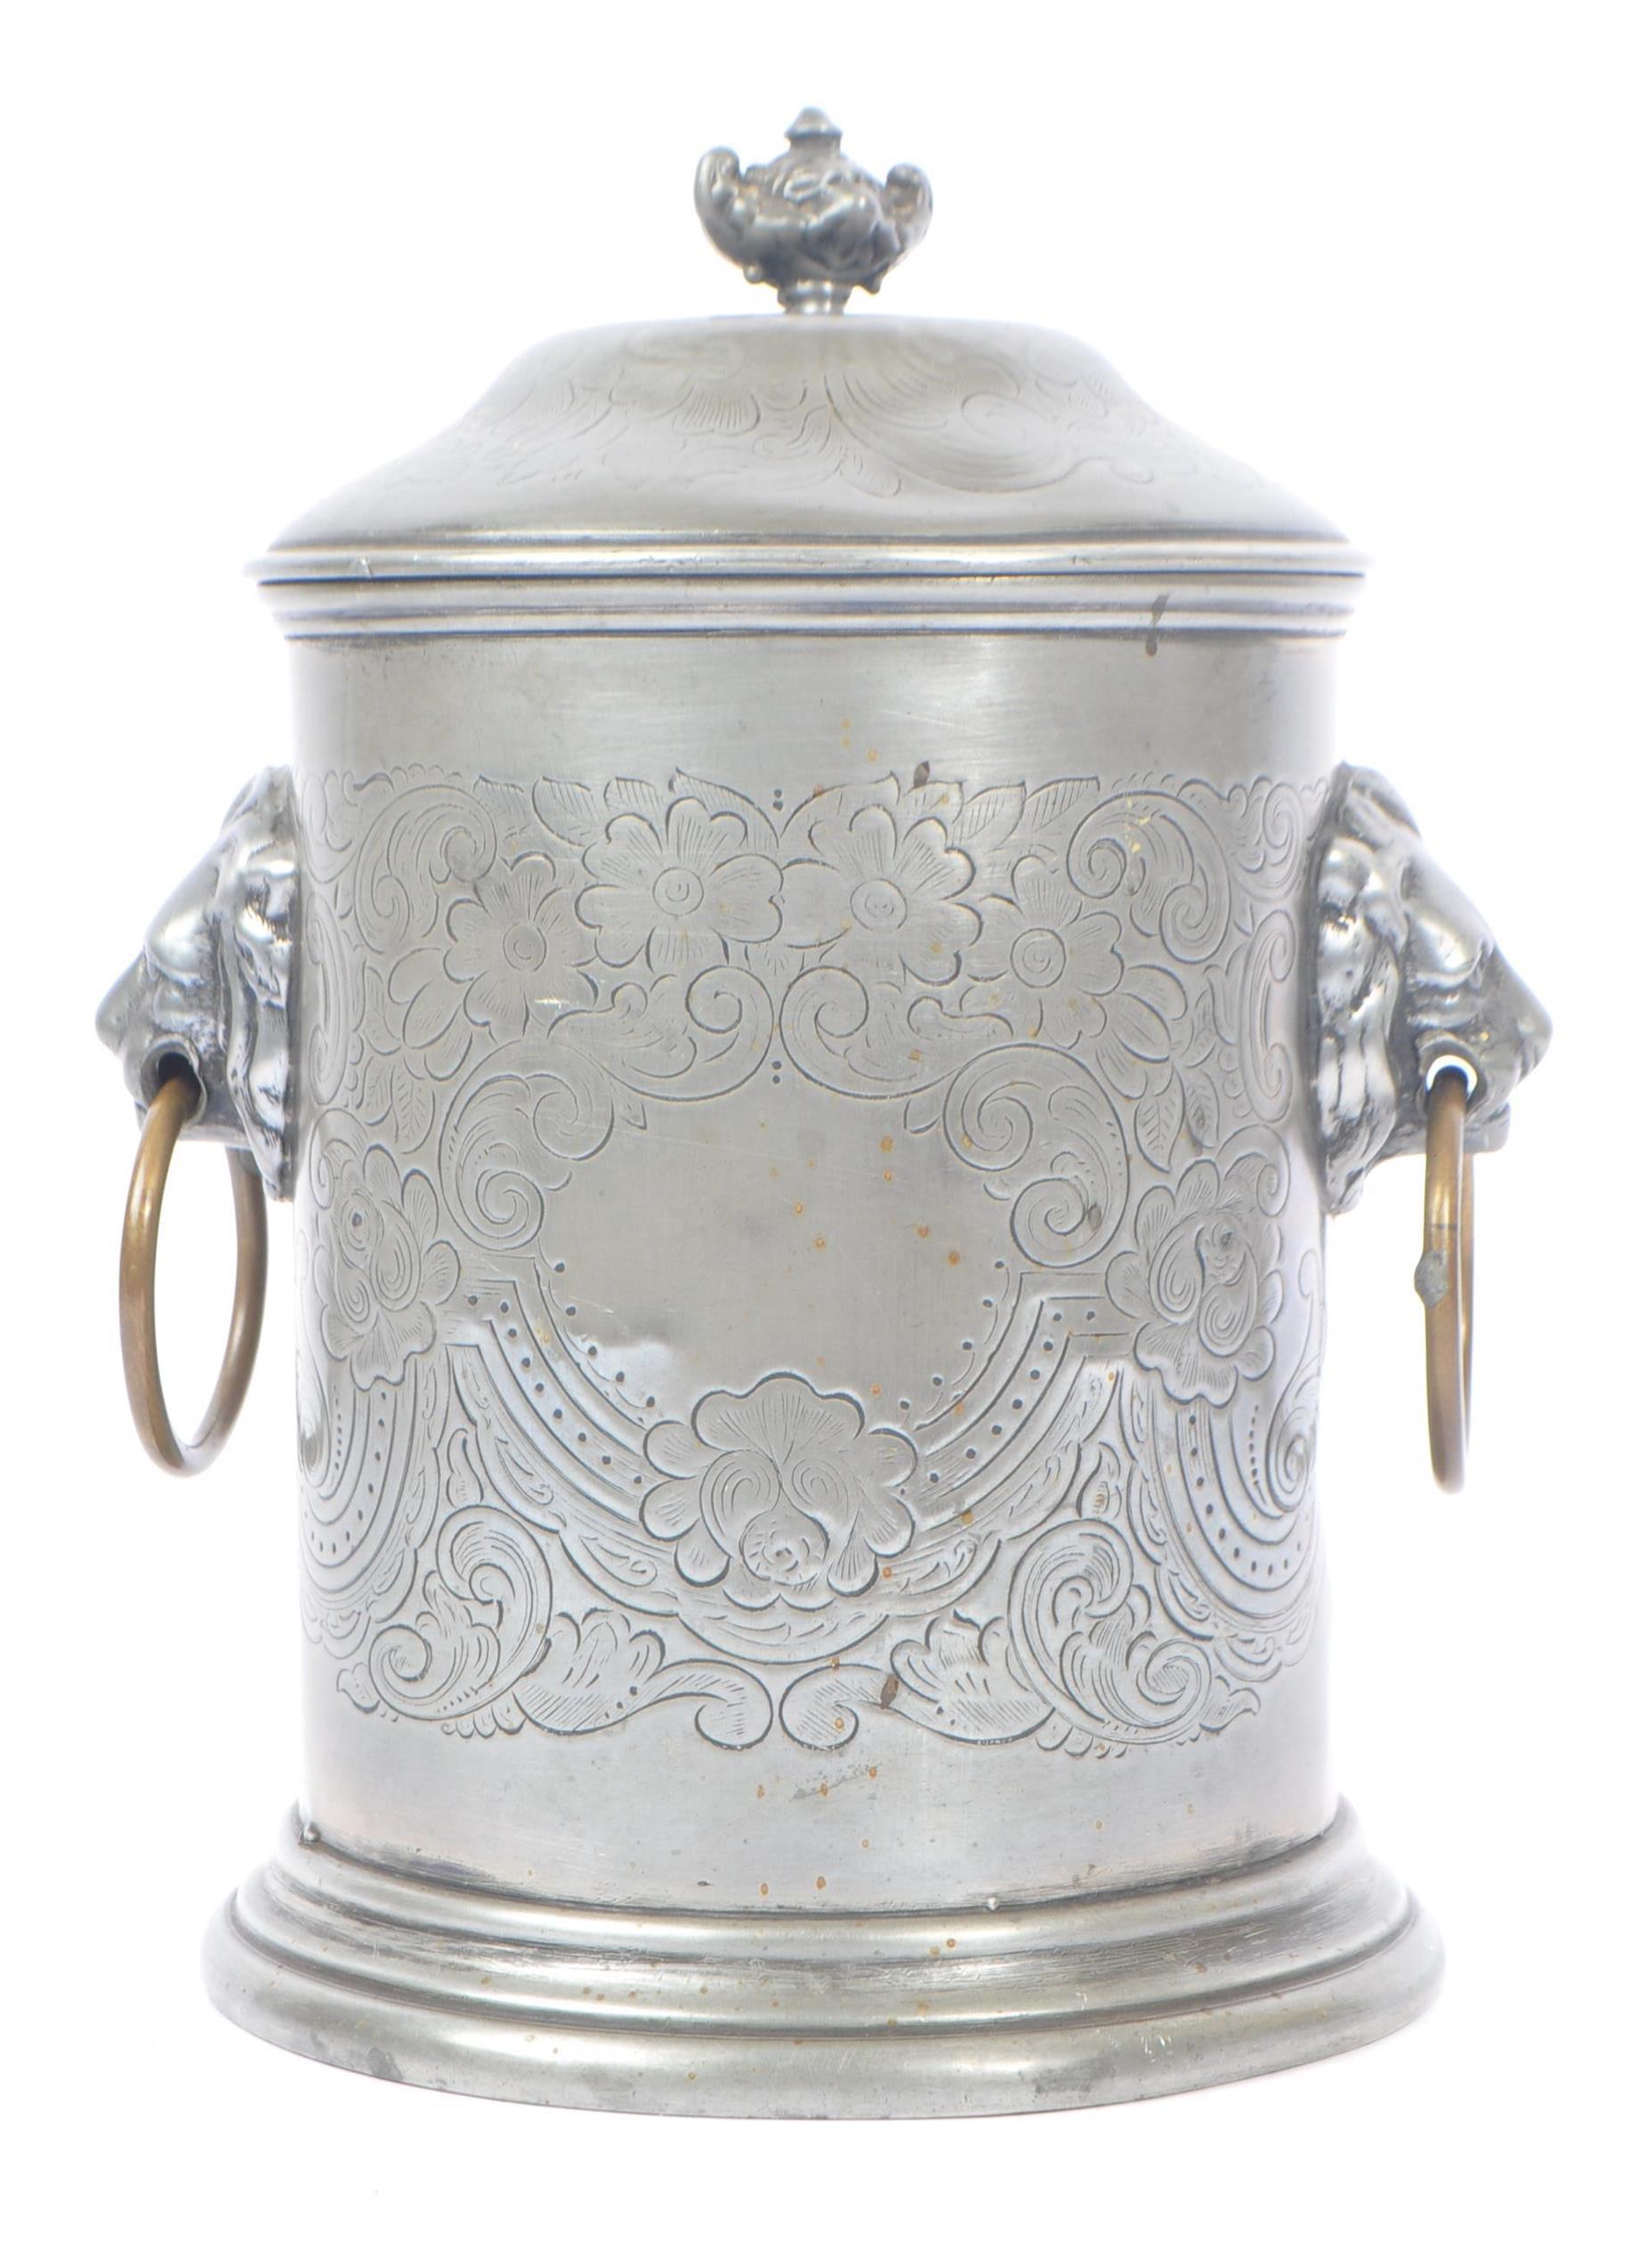 ANGLO-INDIAN PEWTER LIDDED TEA CADDY WITH LION HEAD HANDLES